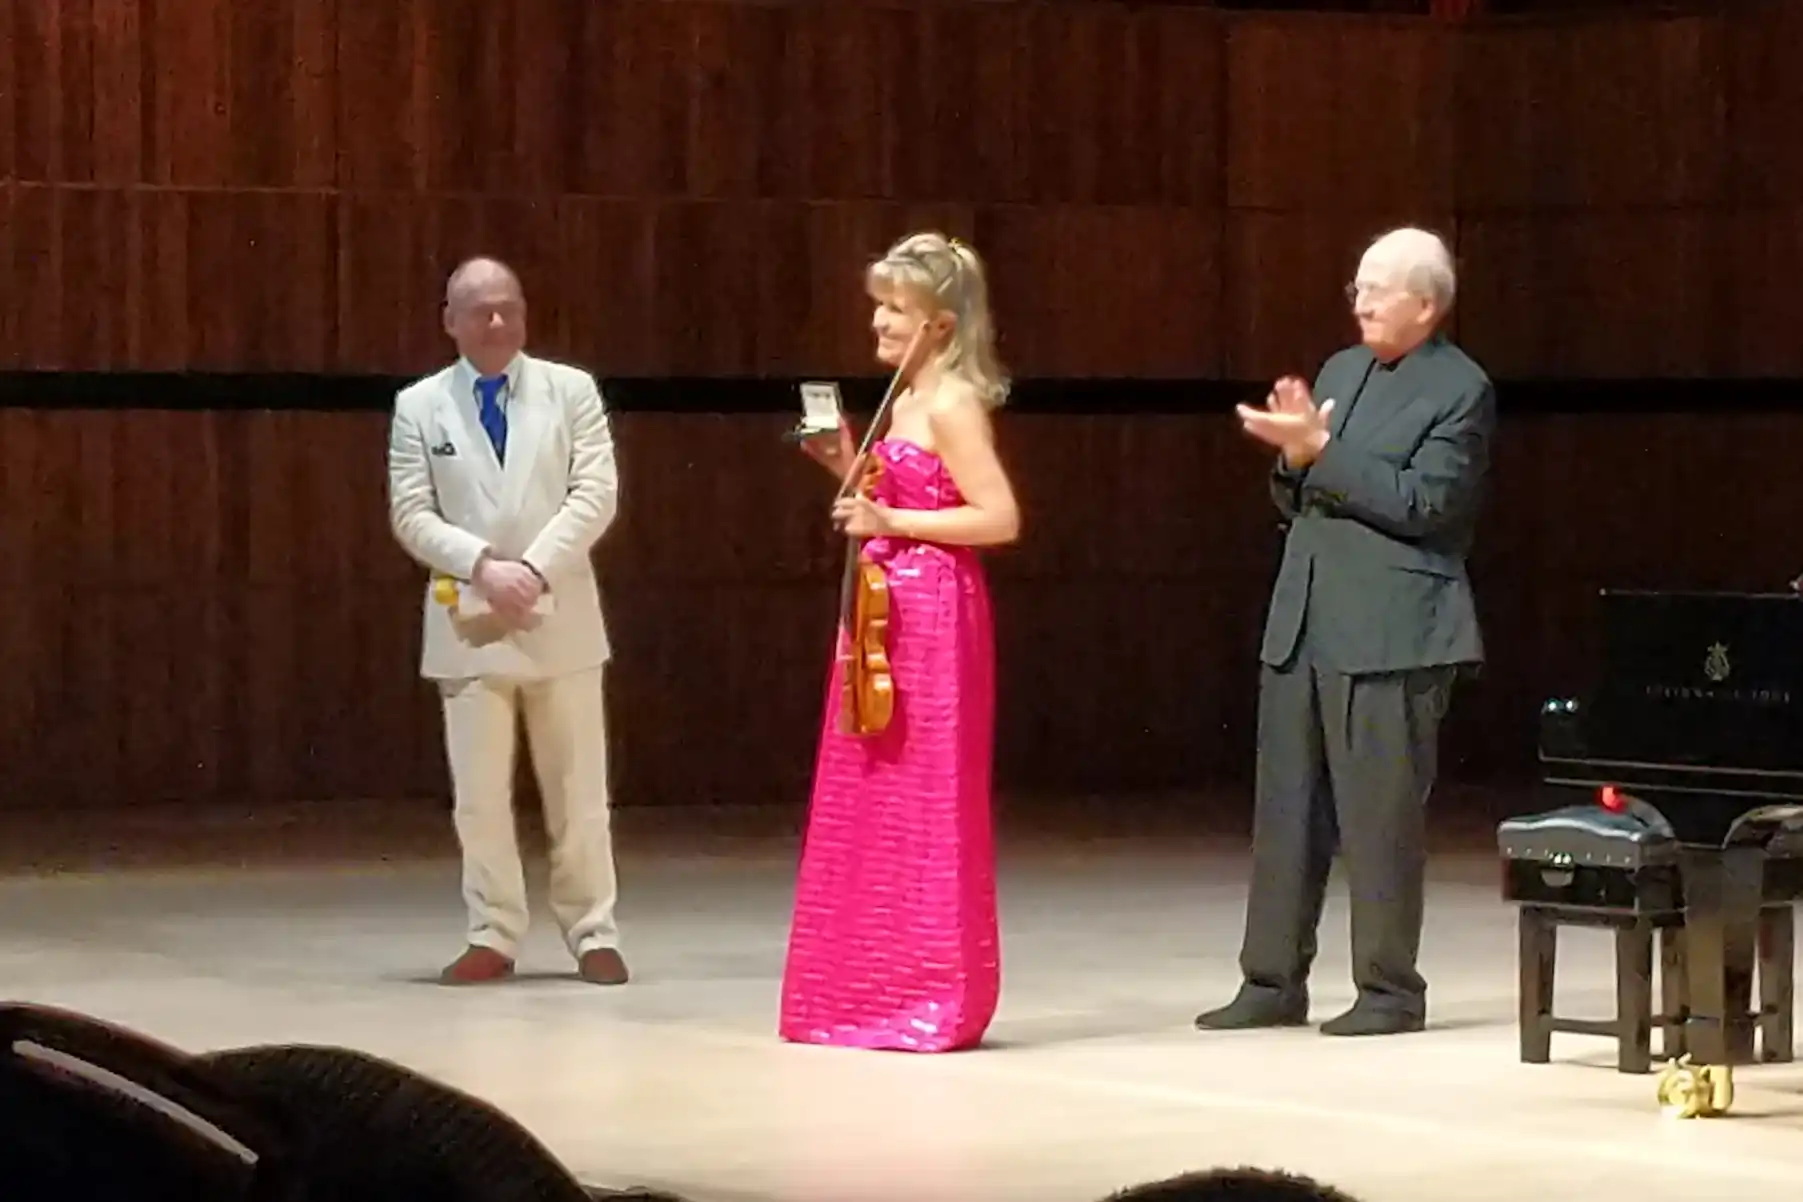 Anna-Sophie Mutter on the stage of the Royal Festival Hall. She is holding
her violin and bow in one hand, and with the other she displays the gold medal
she has just been presented.